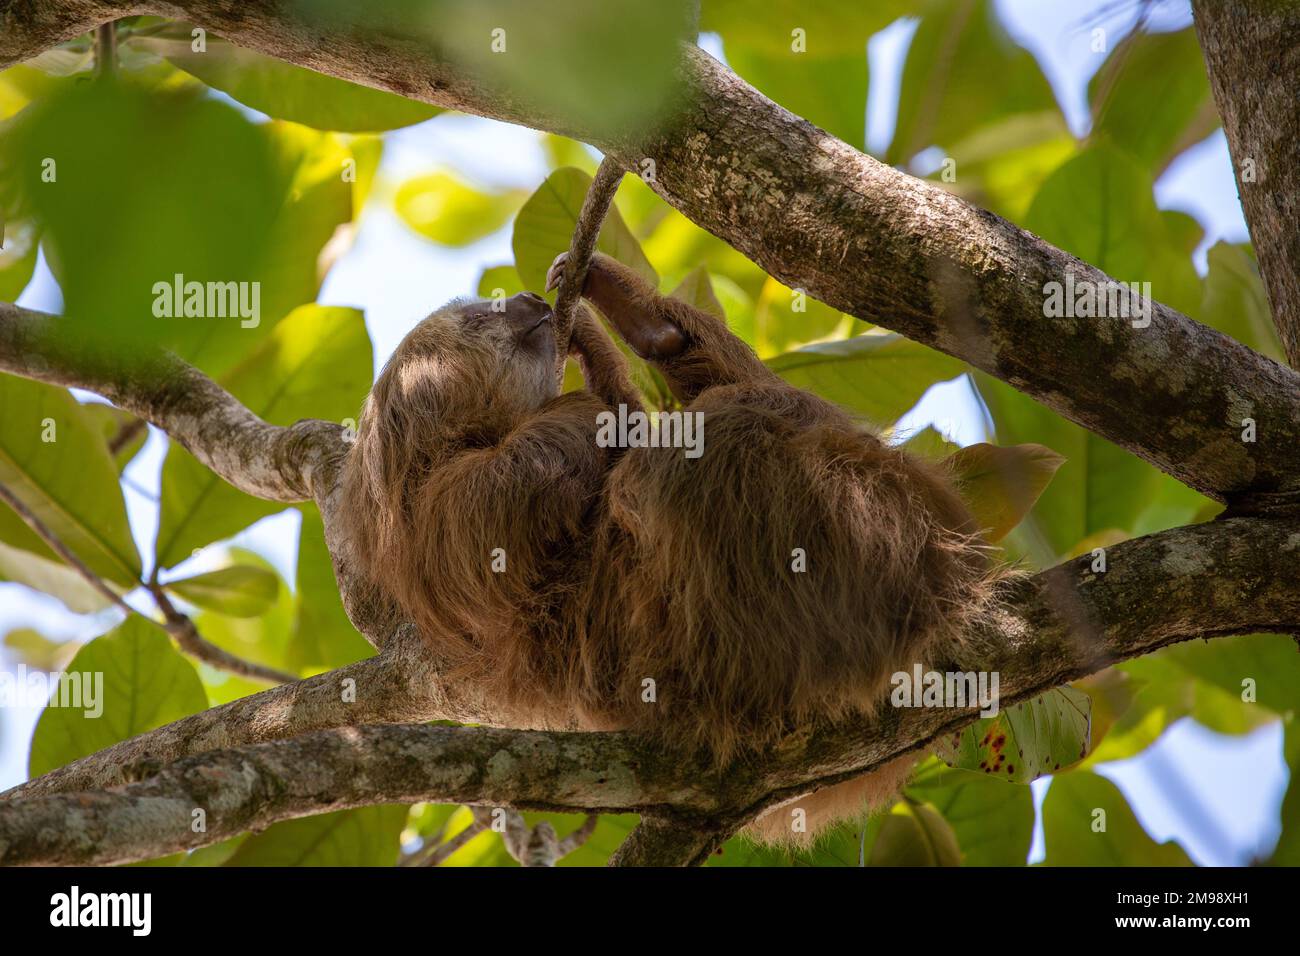 One cuddly three-toed sloth hangs in a branch in Cahuita National Park, Costa Rica. Stock Photo